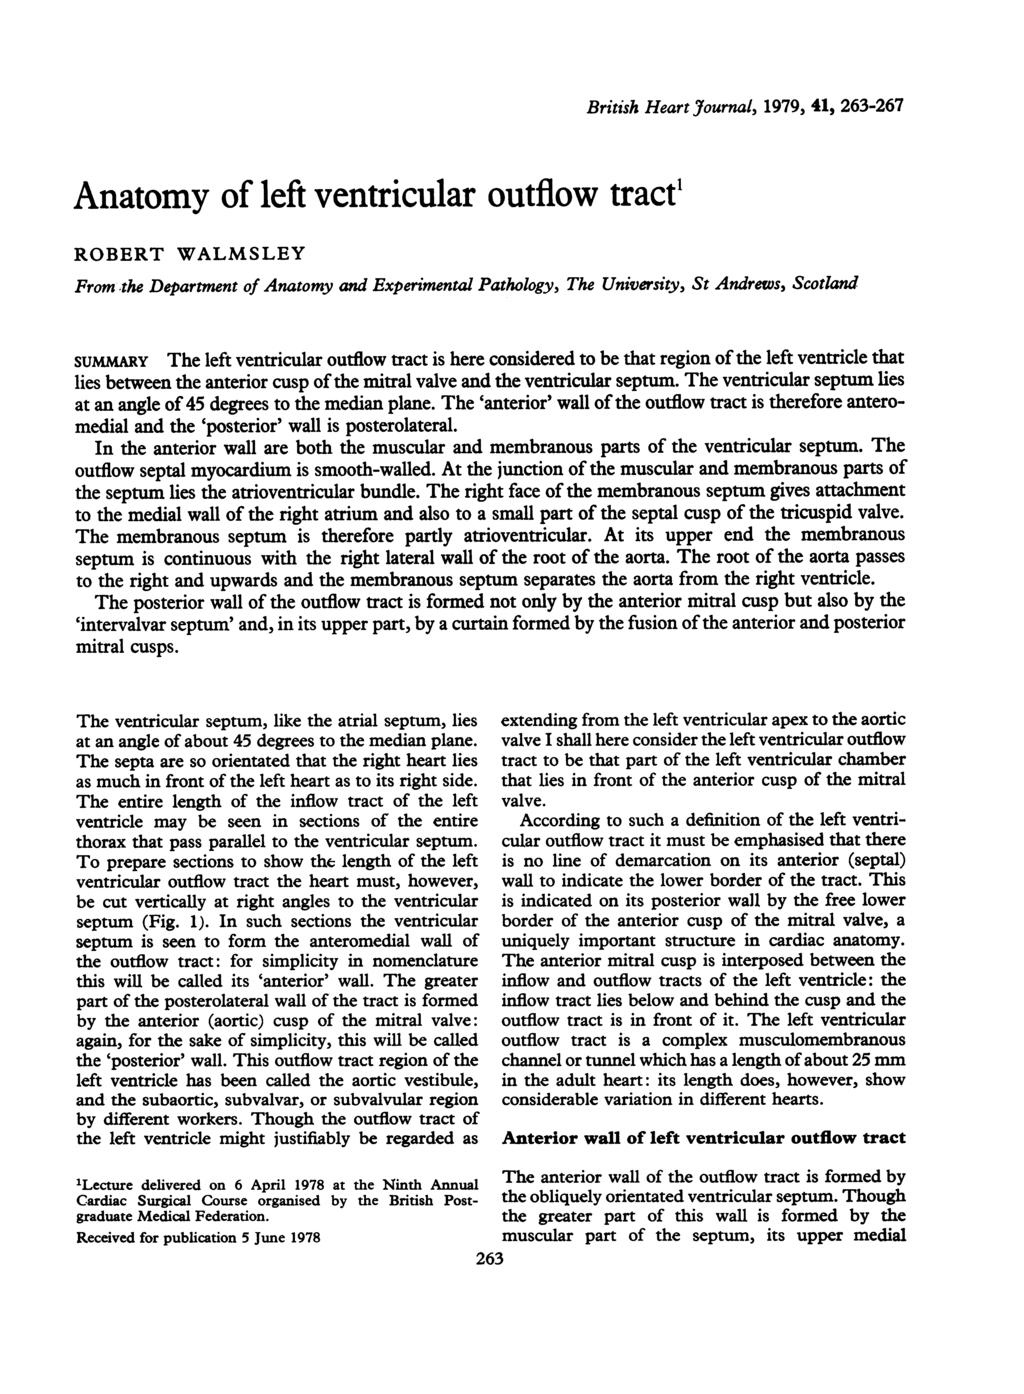 Anatomy of left ventricular outflow tract' ROBERT WALMSLEY British Heart Journal, 1979, 41, 263-267 From the Department of Anatomy and Experimental Pathology, The University, St Andrews, Scotland